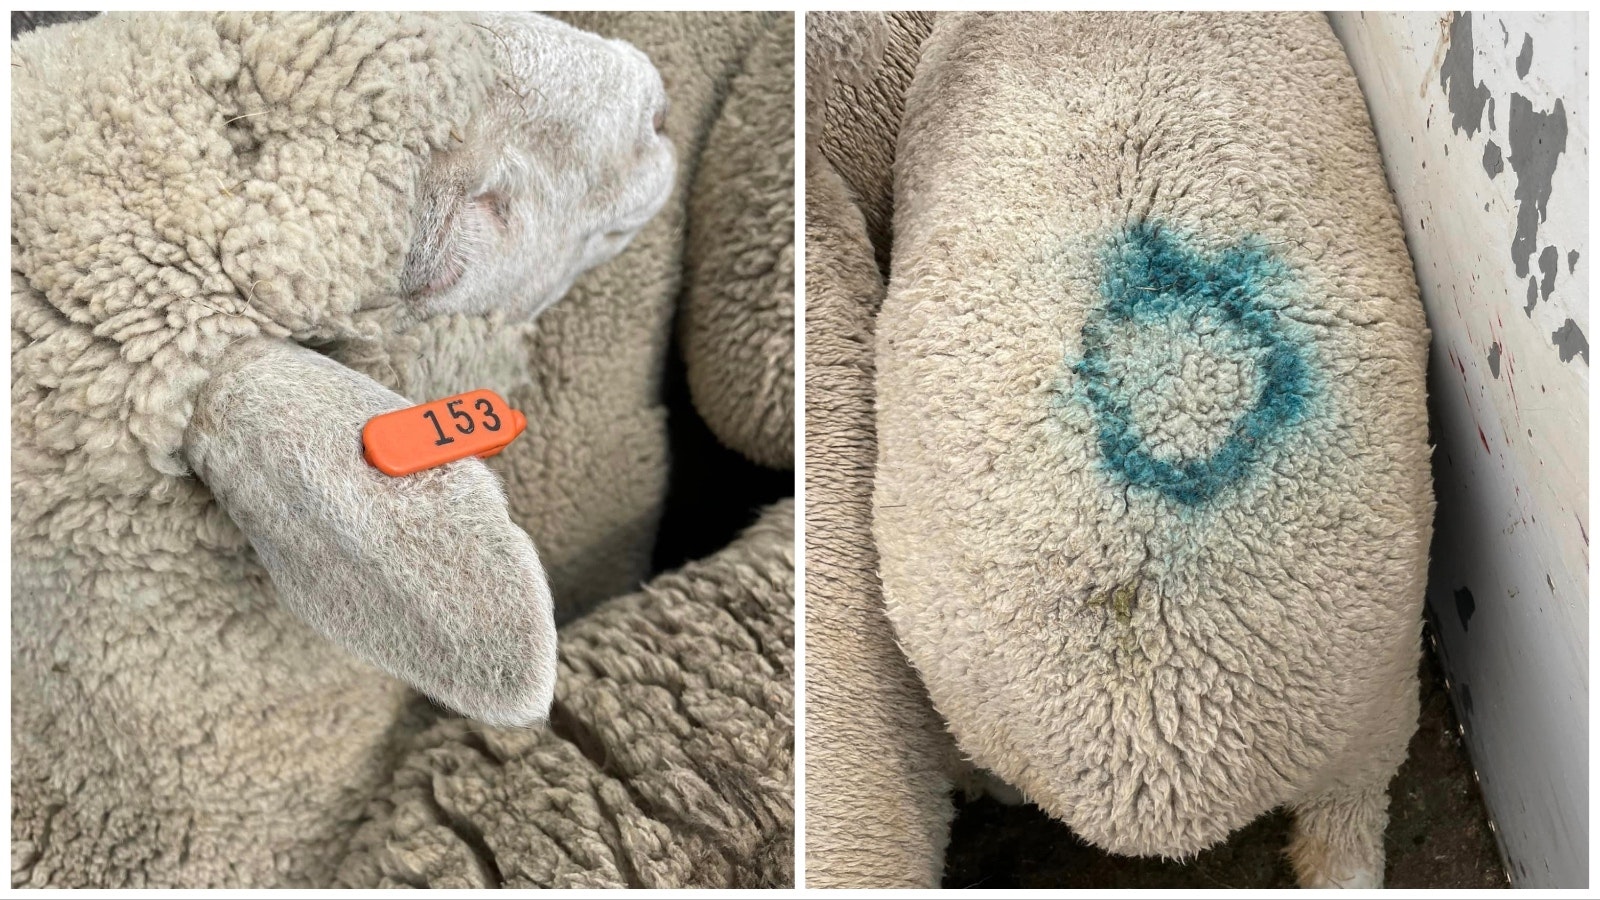 Out of 70 sheep reported missing from a Campbell County ranch in early July, 48 were returned and 32 remain at large. The missing sheep carry a blue paint circle brand on their butts and orange ear tags.